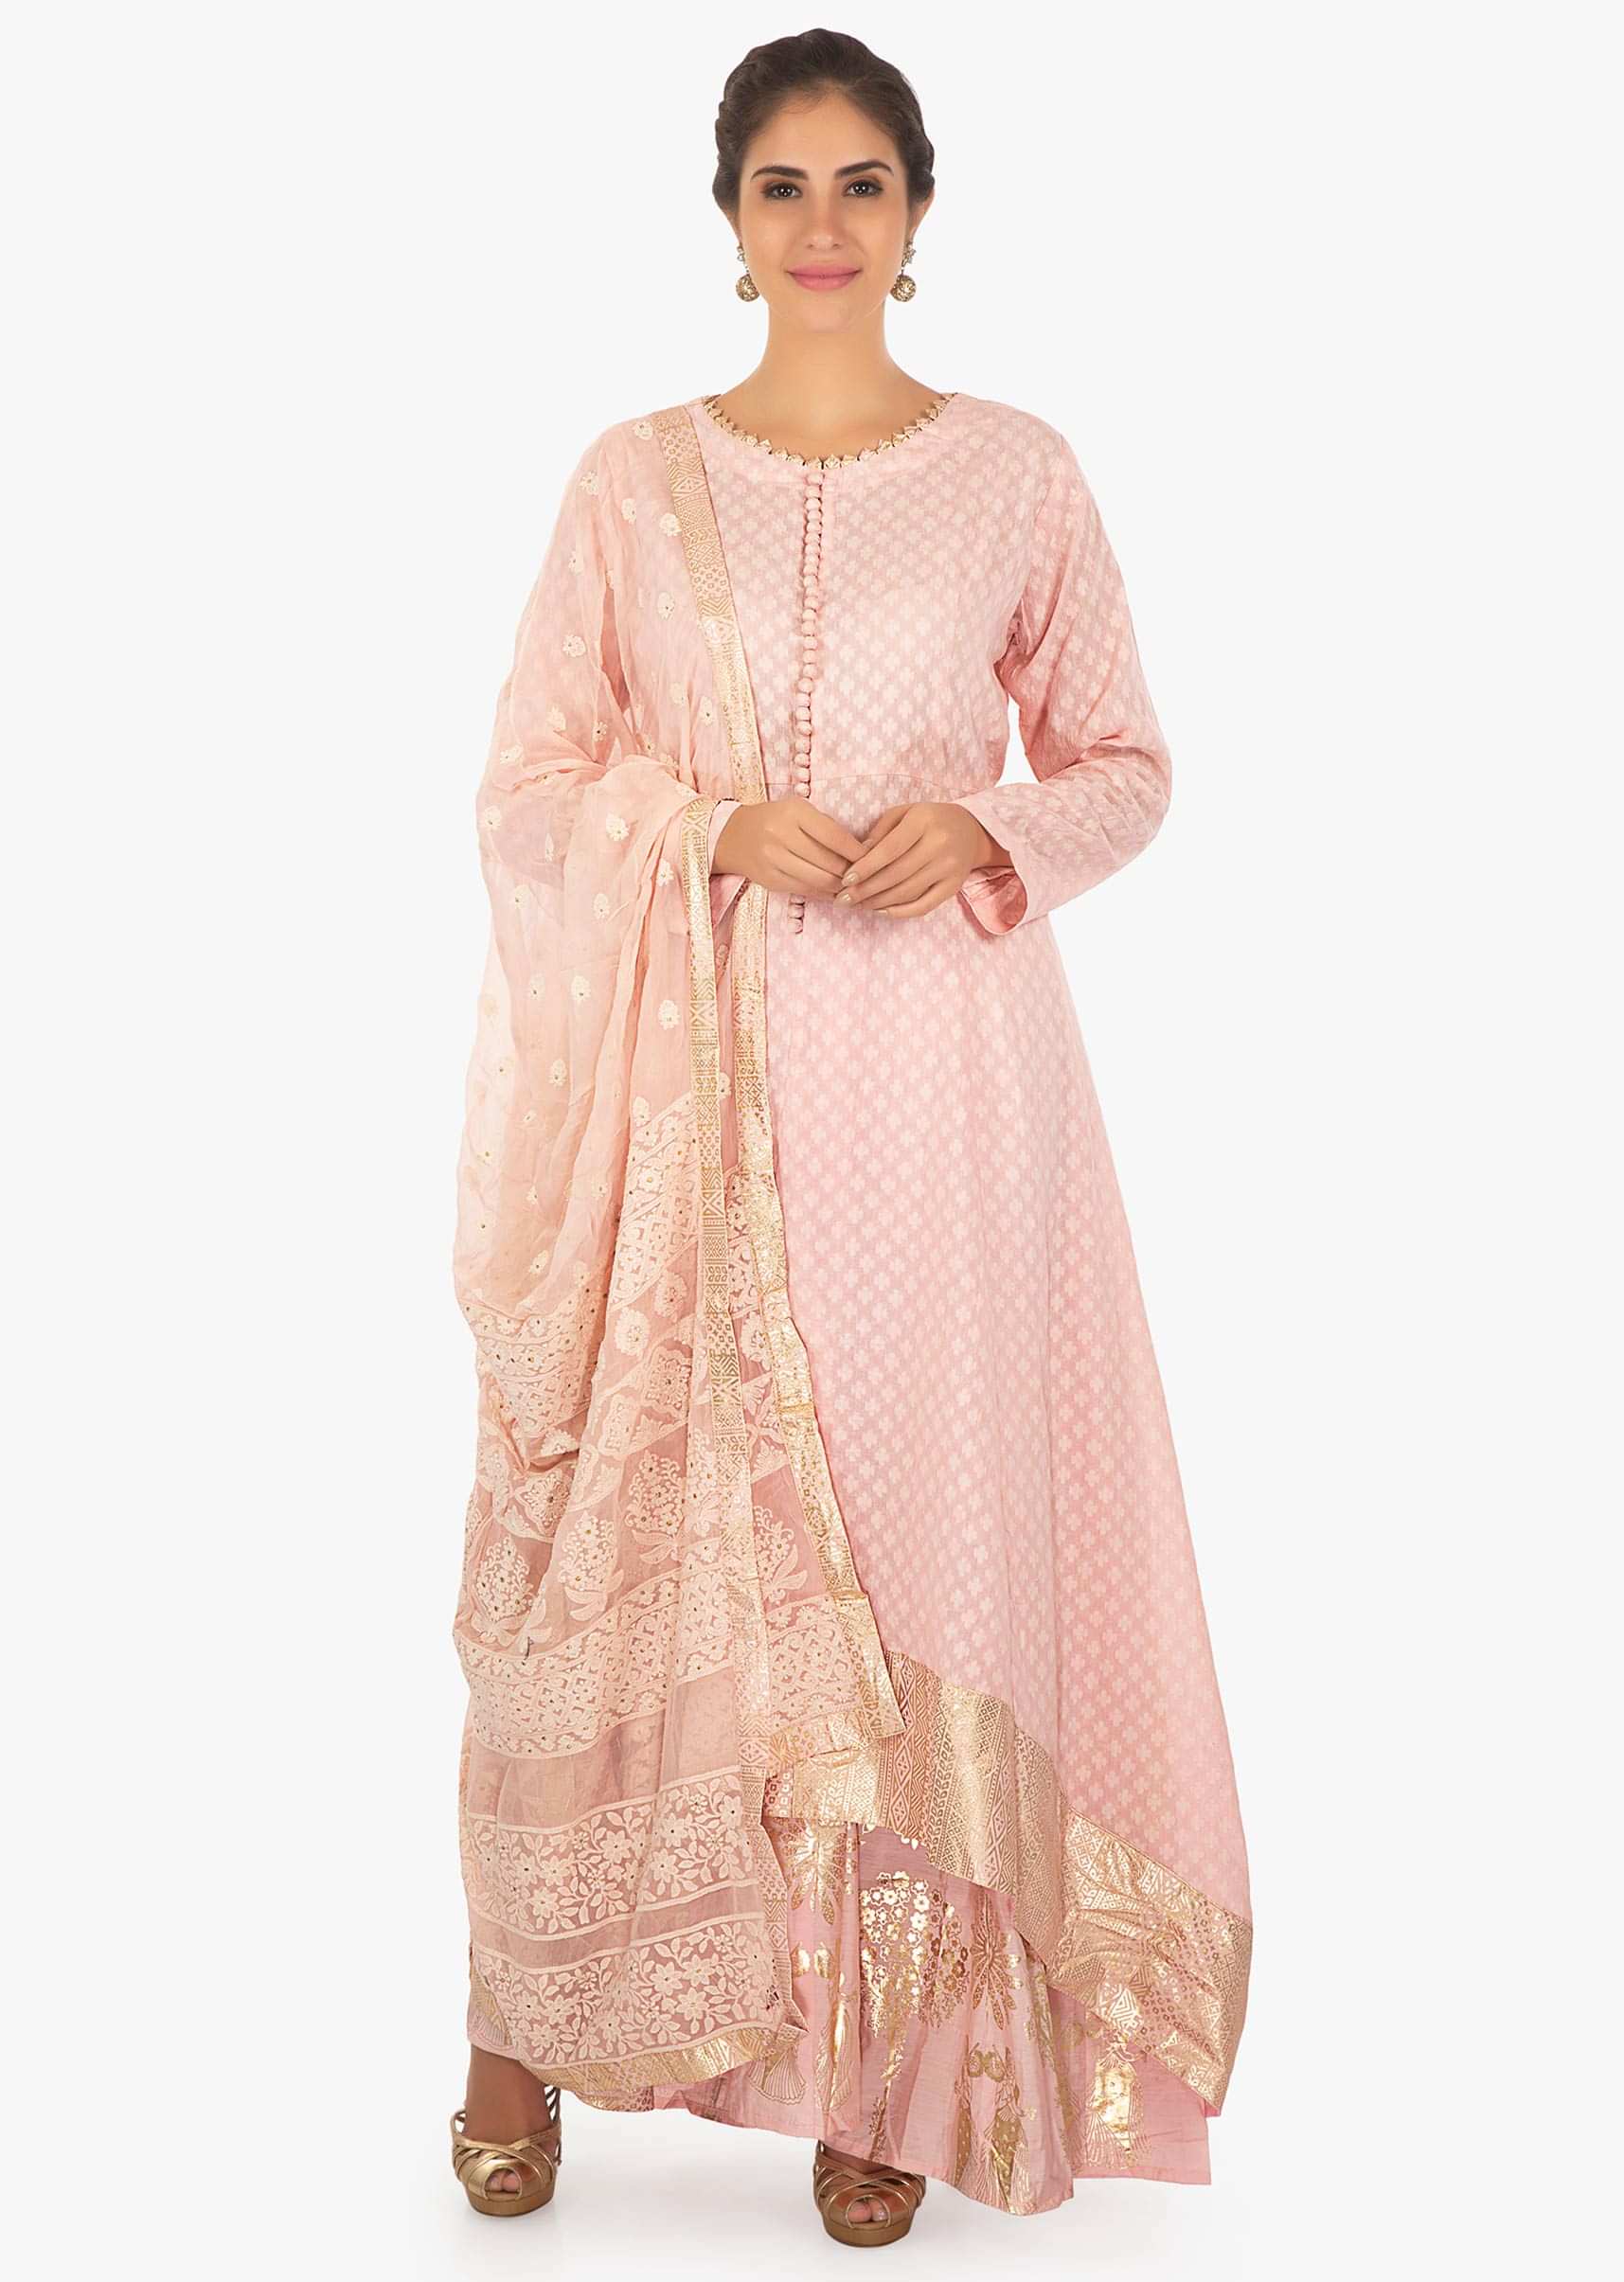  jacquard cotton pink kurti in foil printed hemline paired with a foil printed palazzo and lucknowi thread work dupatta only on Kalki